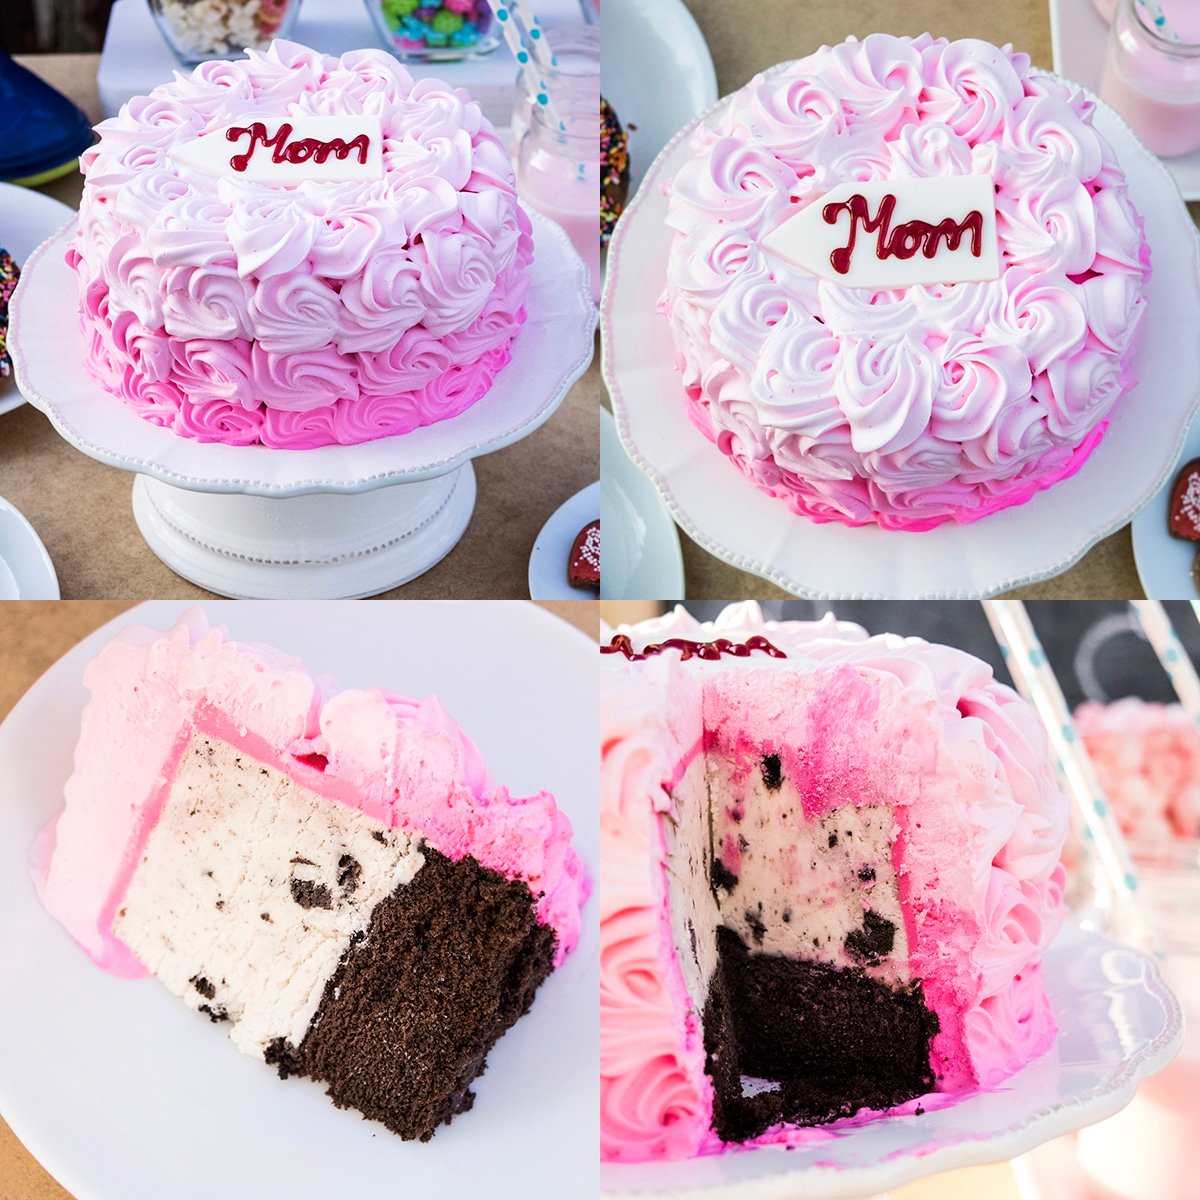 Collage Image of Pink Ice Cream Cake.